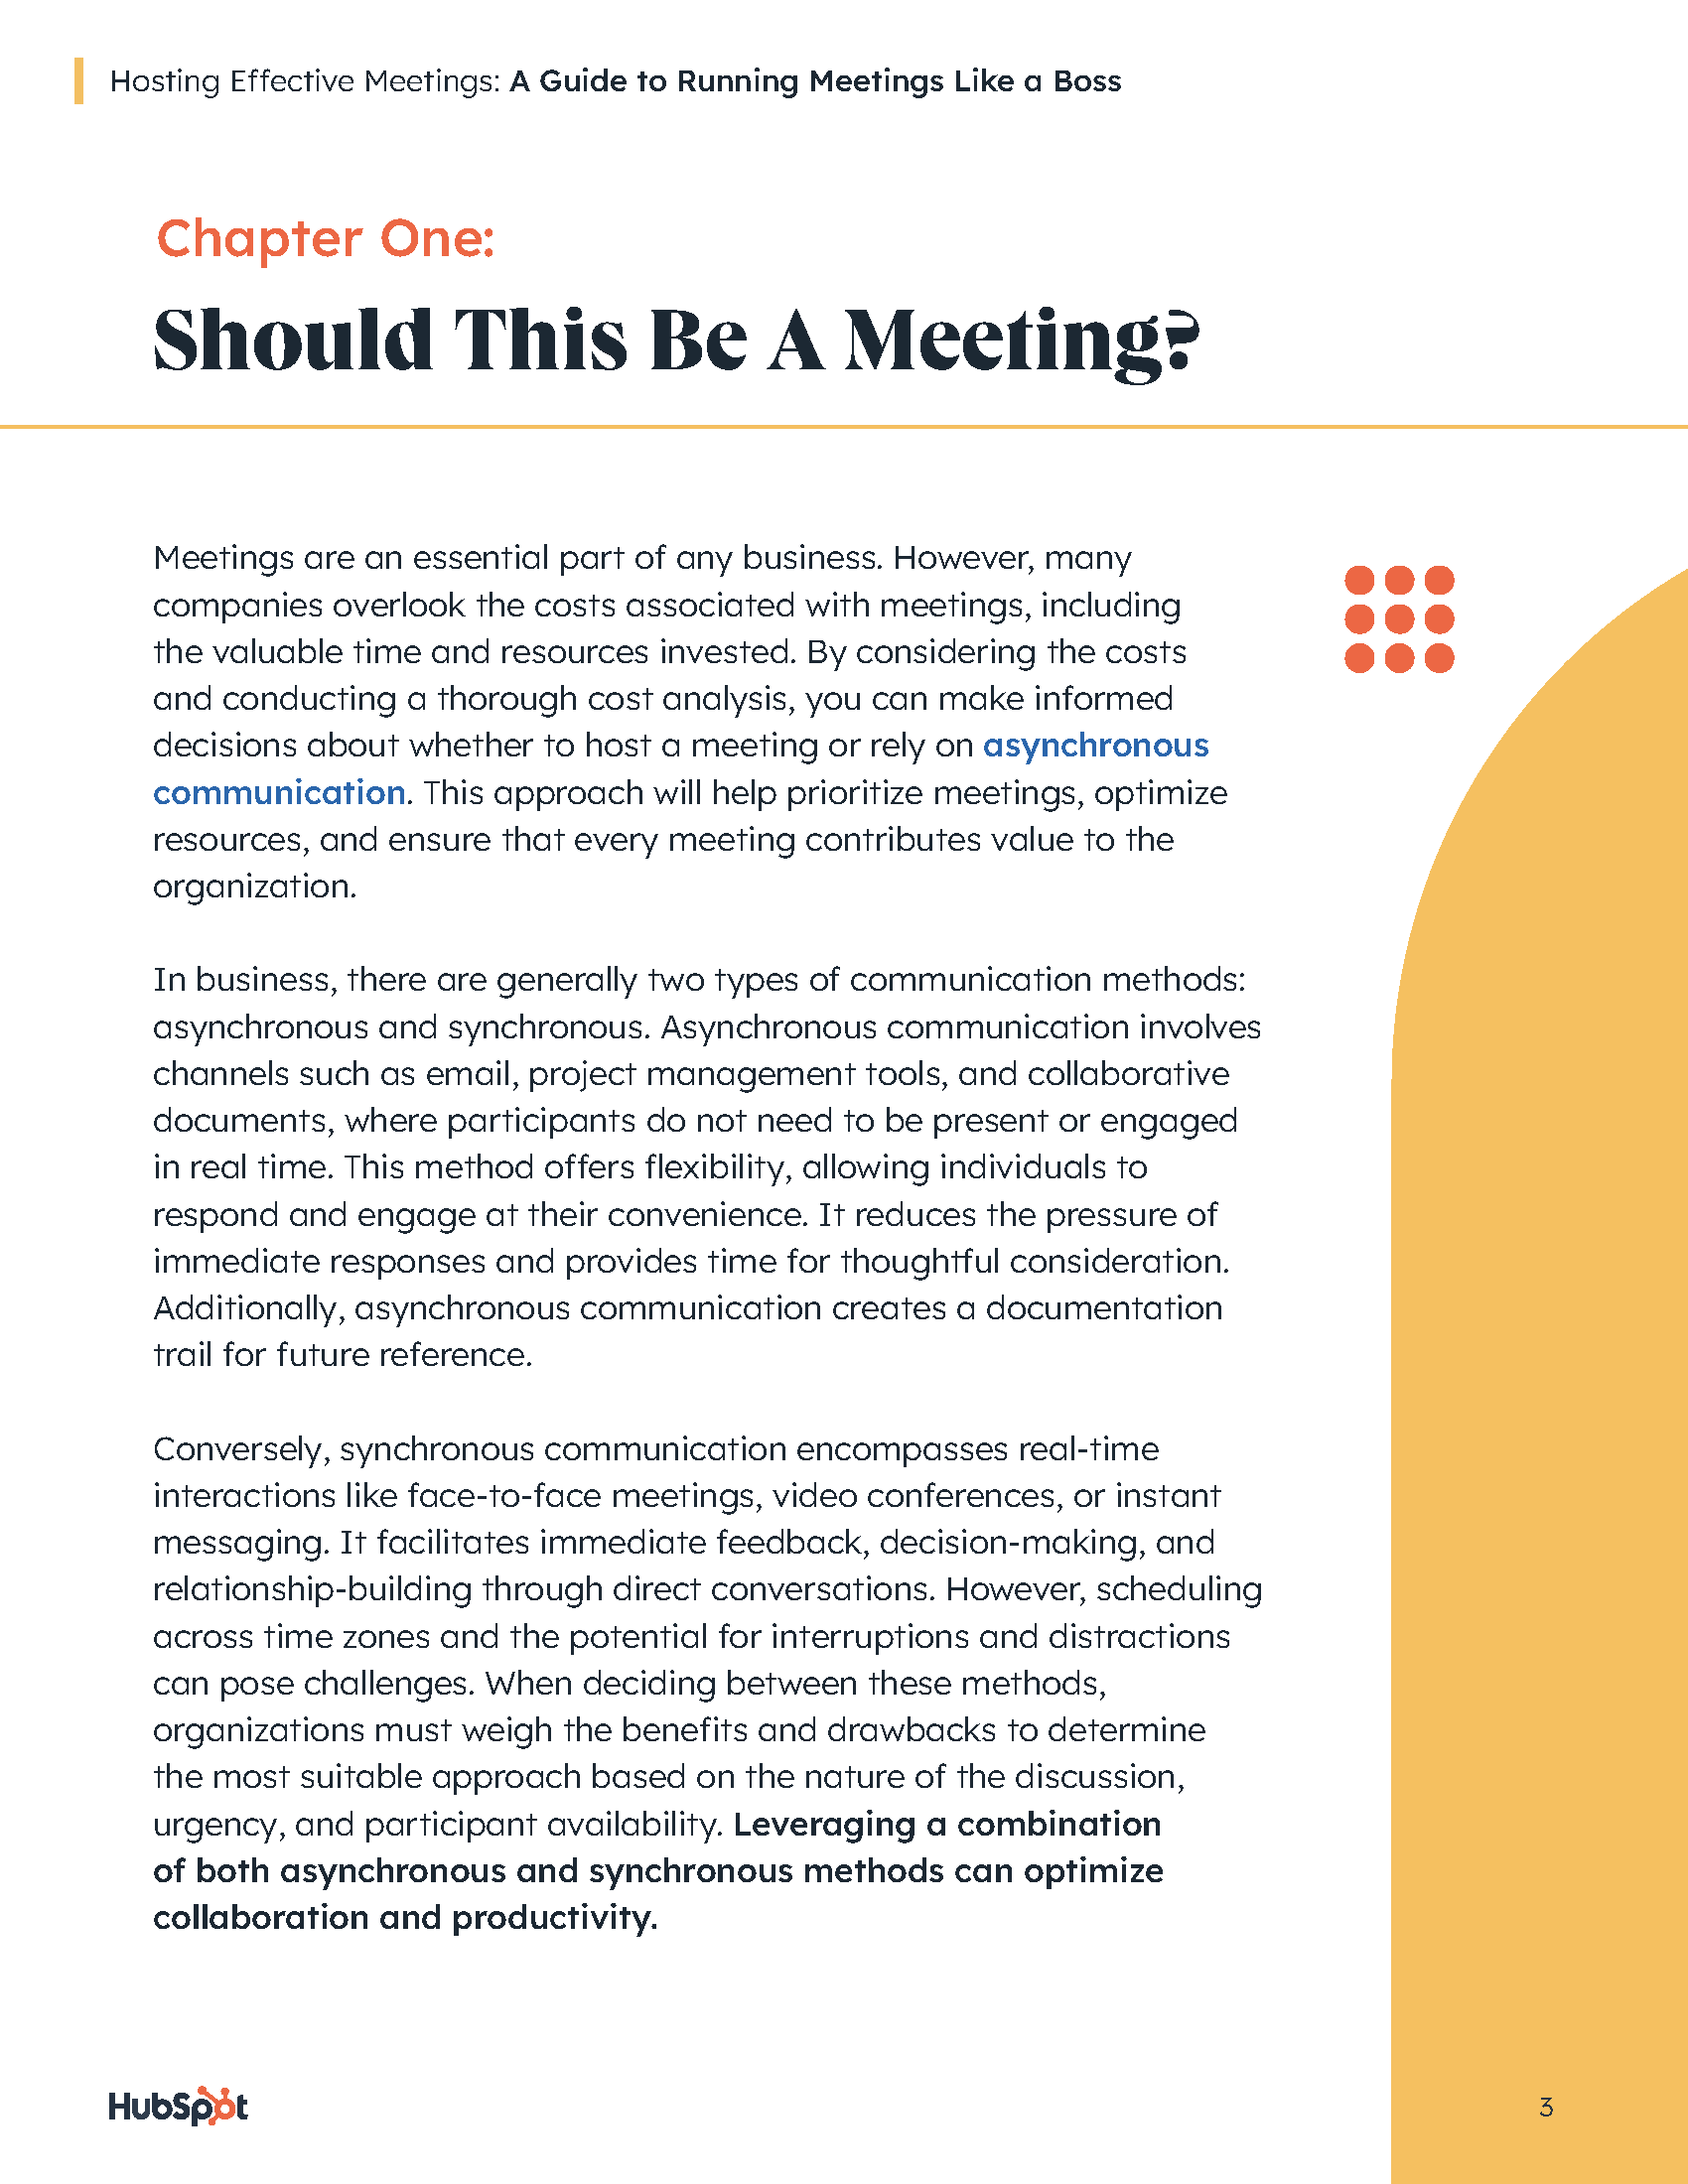 How to Run Effective Meetings_Page_03